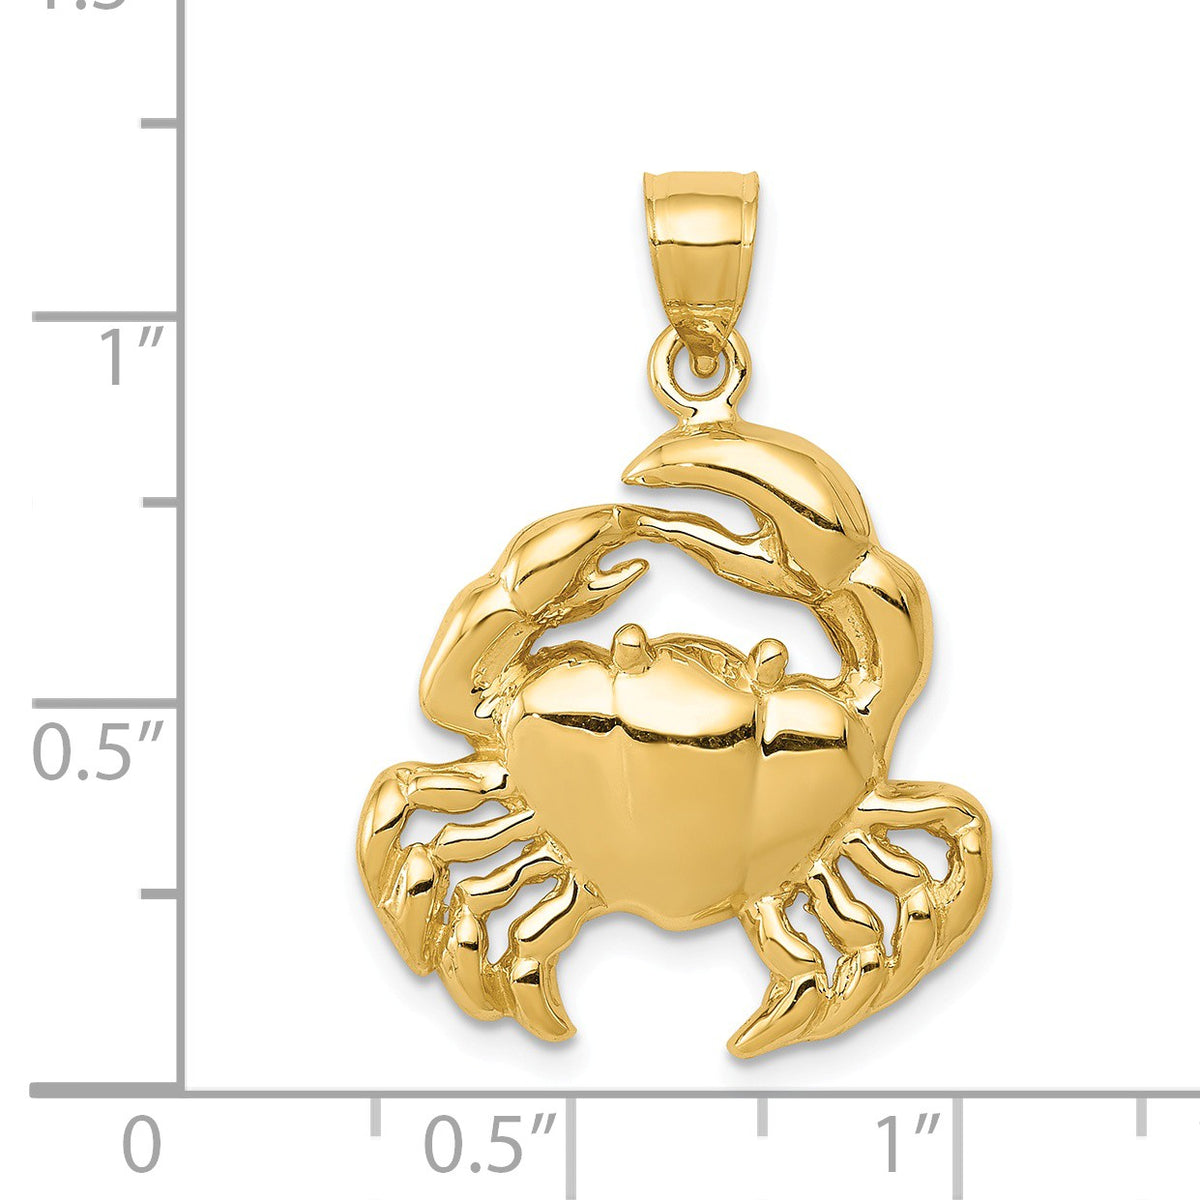 Alternate view of the 14k Yellow Gold Polished 2D Crab Pendant, 20 x 28mm (3/4 x 1 1/8 Inch) by The Black Bow Jewelry Co.